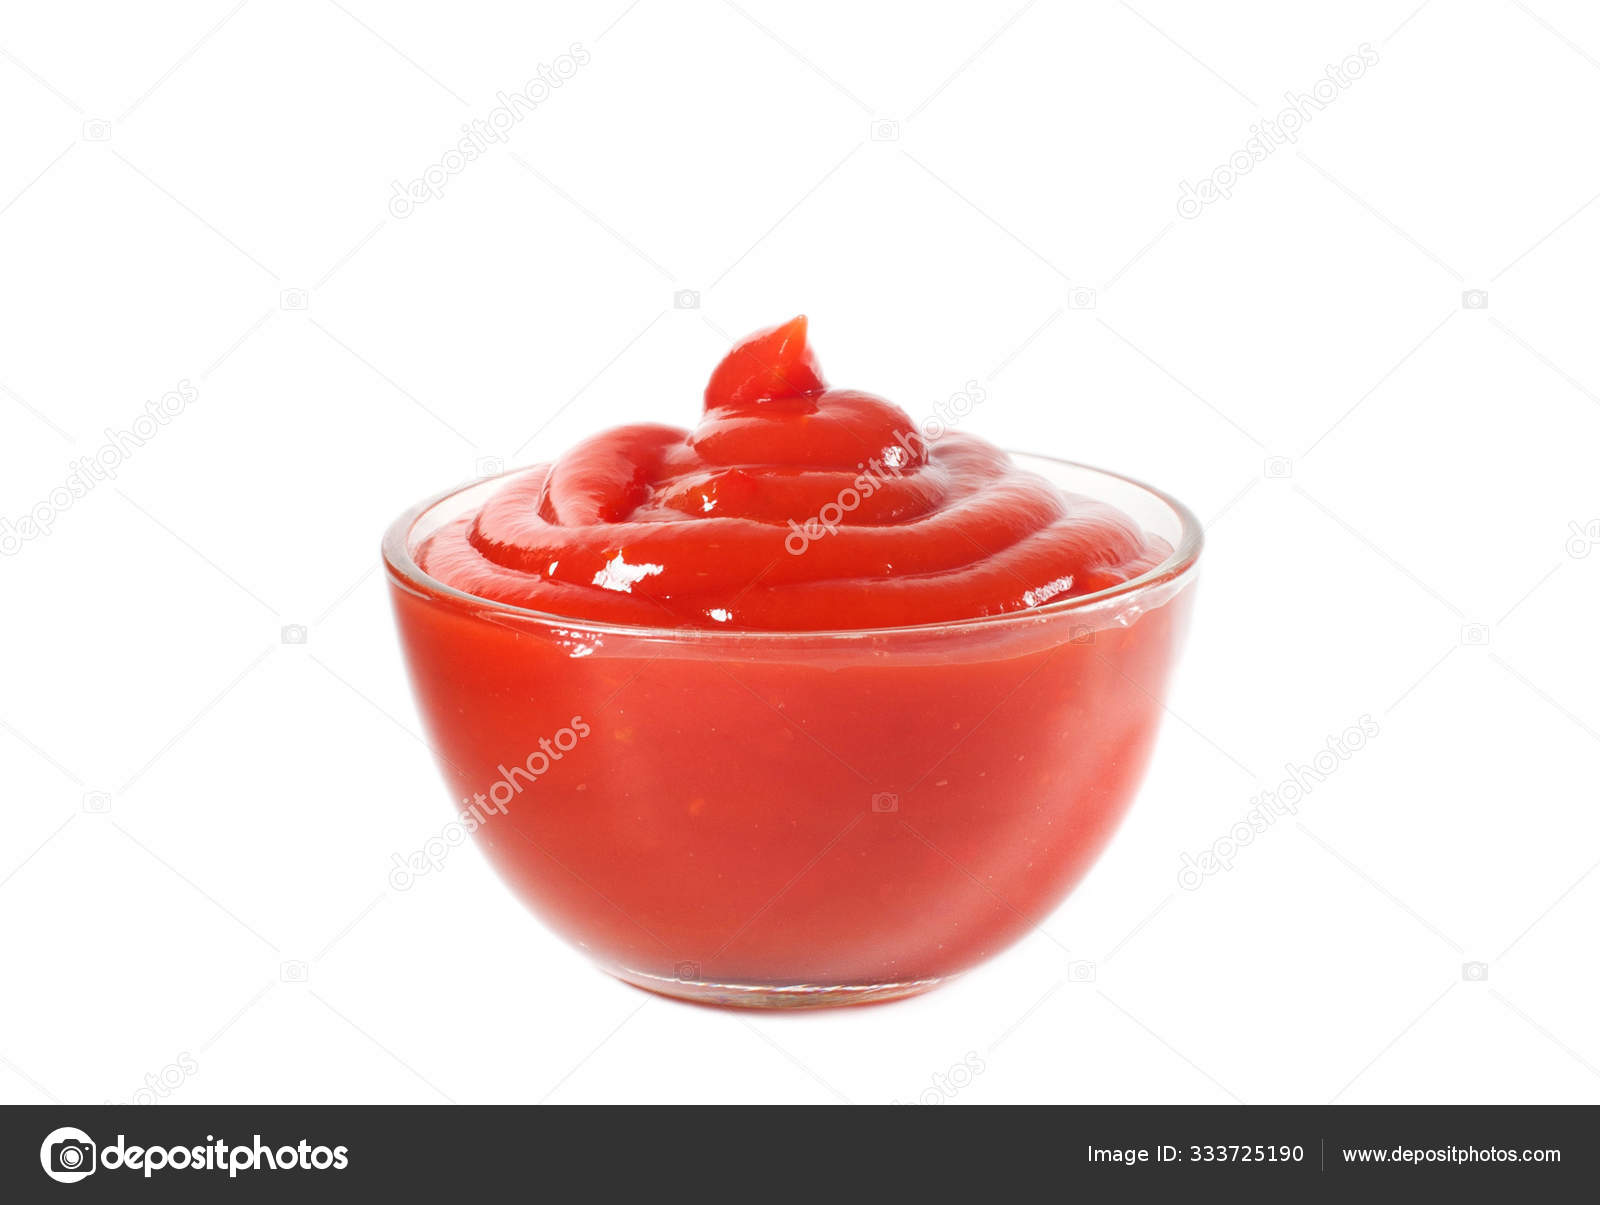 Tomato Ketchup in a Small Transparent Glass Round Bowl Isolated on White  Background Stock Photo - Image of cutout, food: 178117294